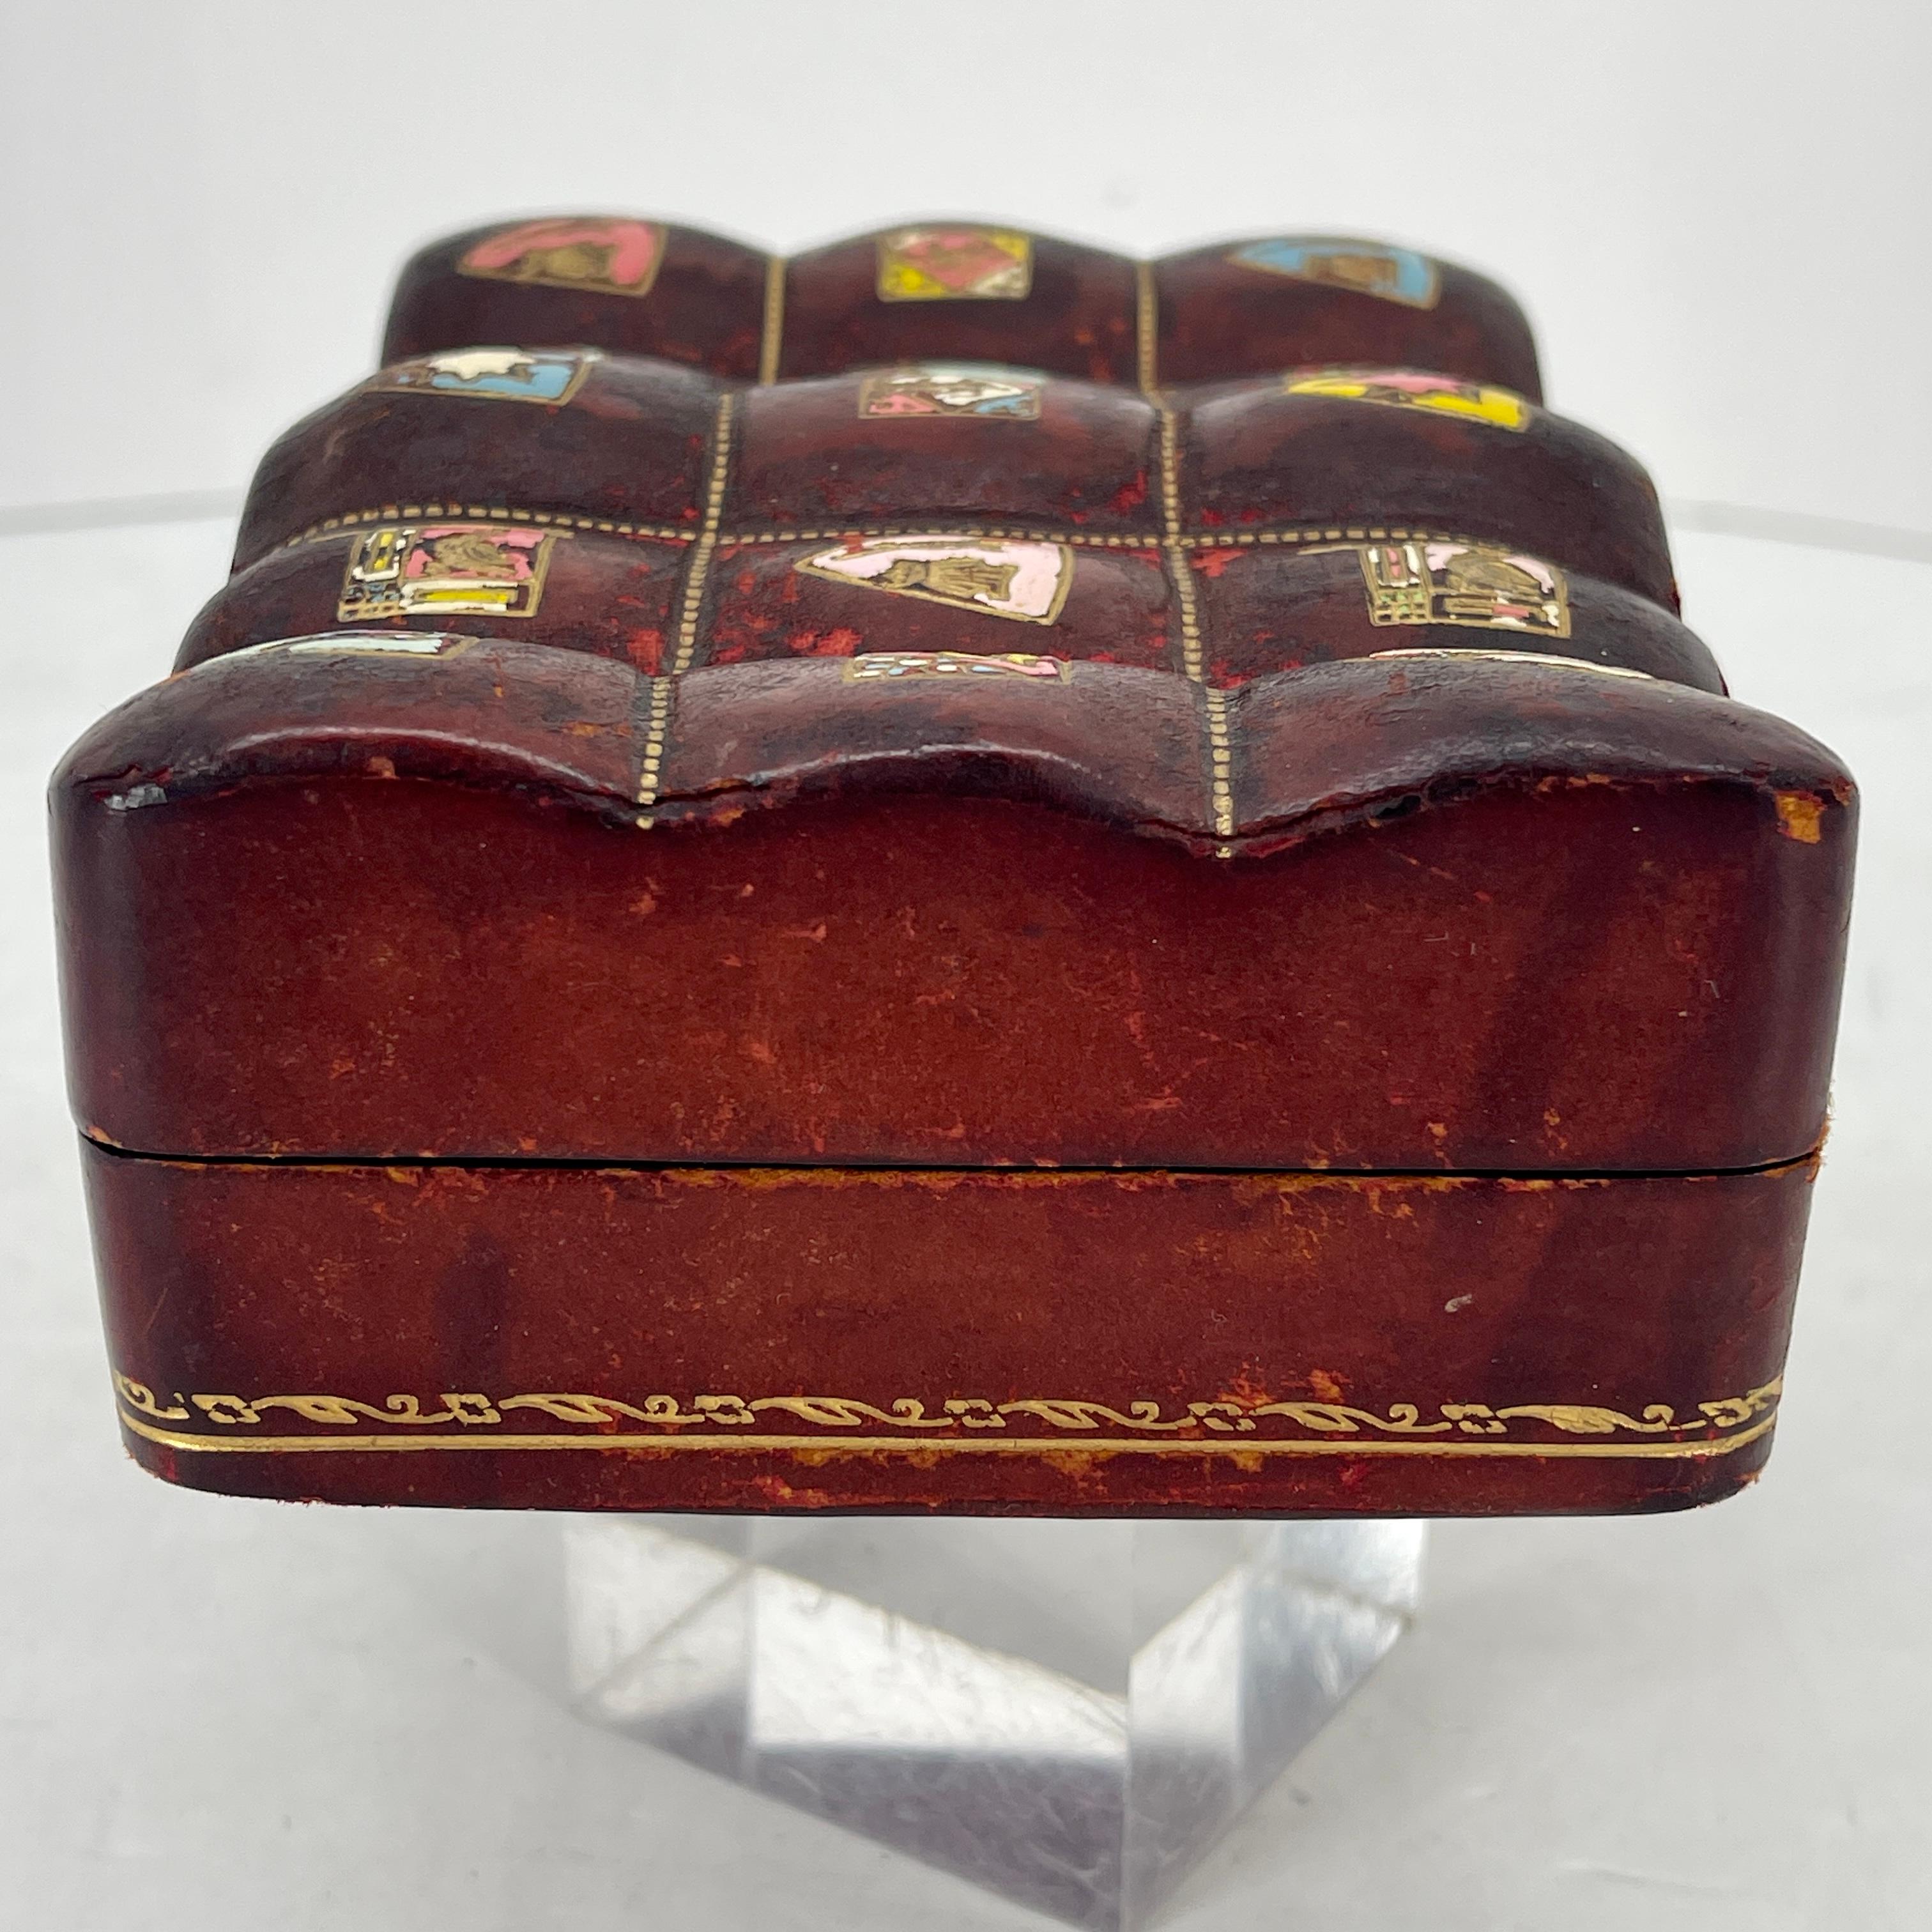 Vintage Italian Jewelry Box in Burgundy Leather, Circa 1950's For Sale 3